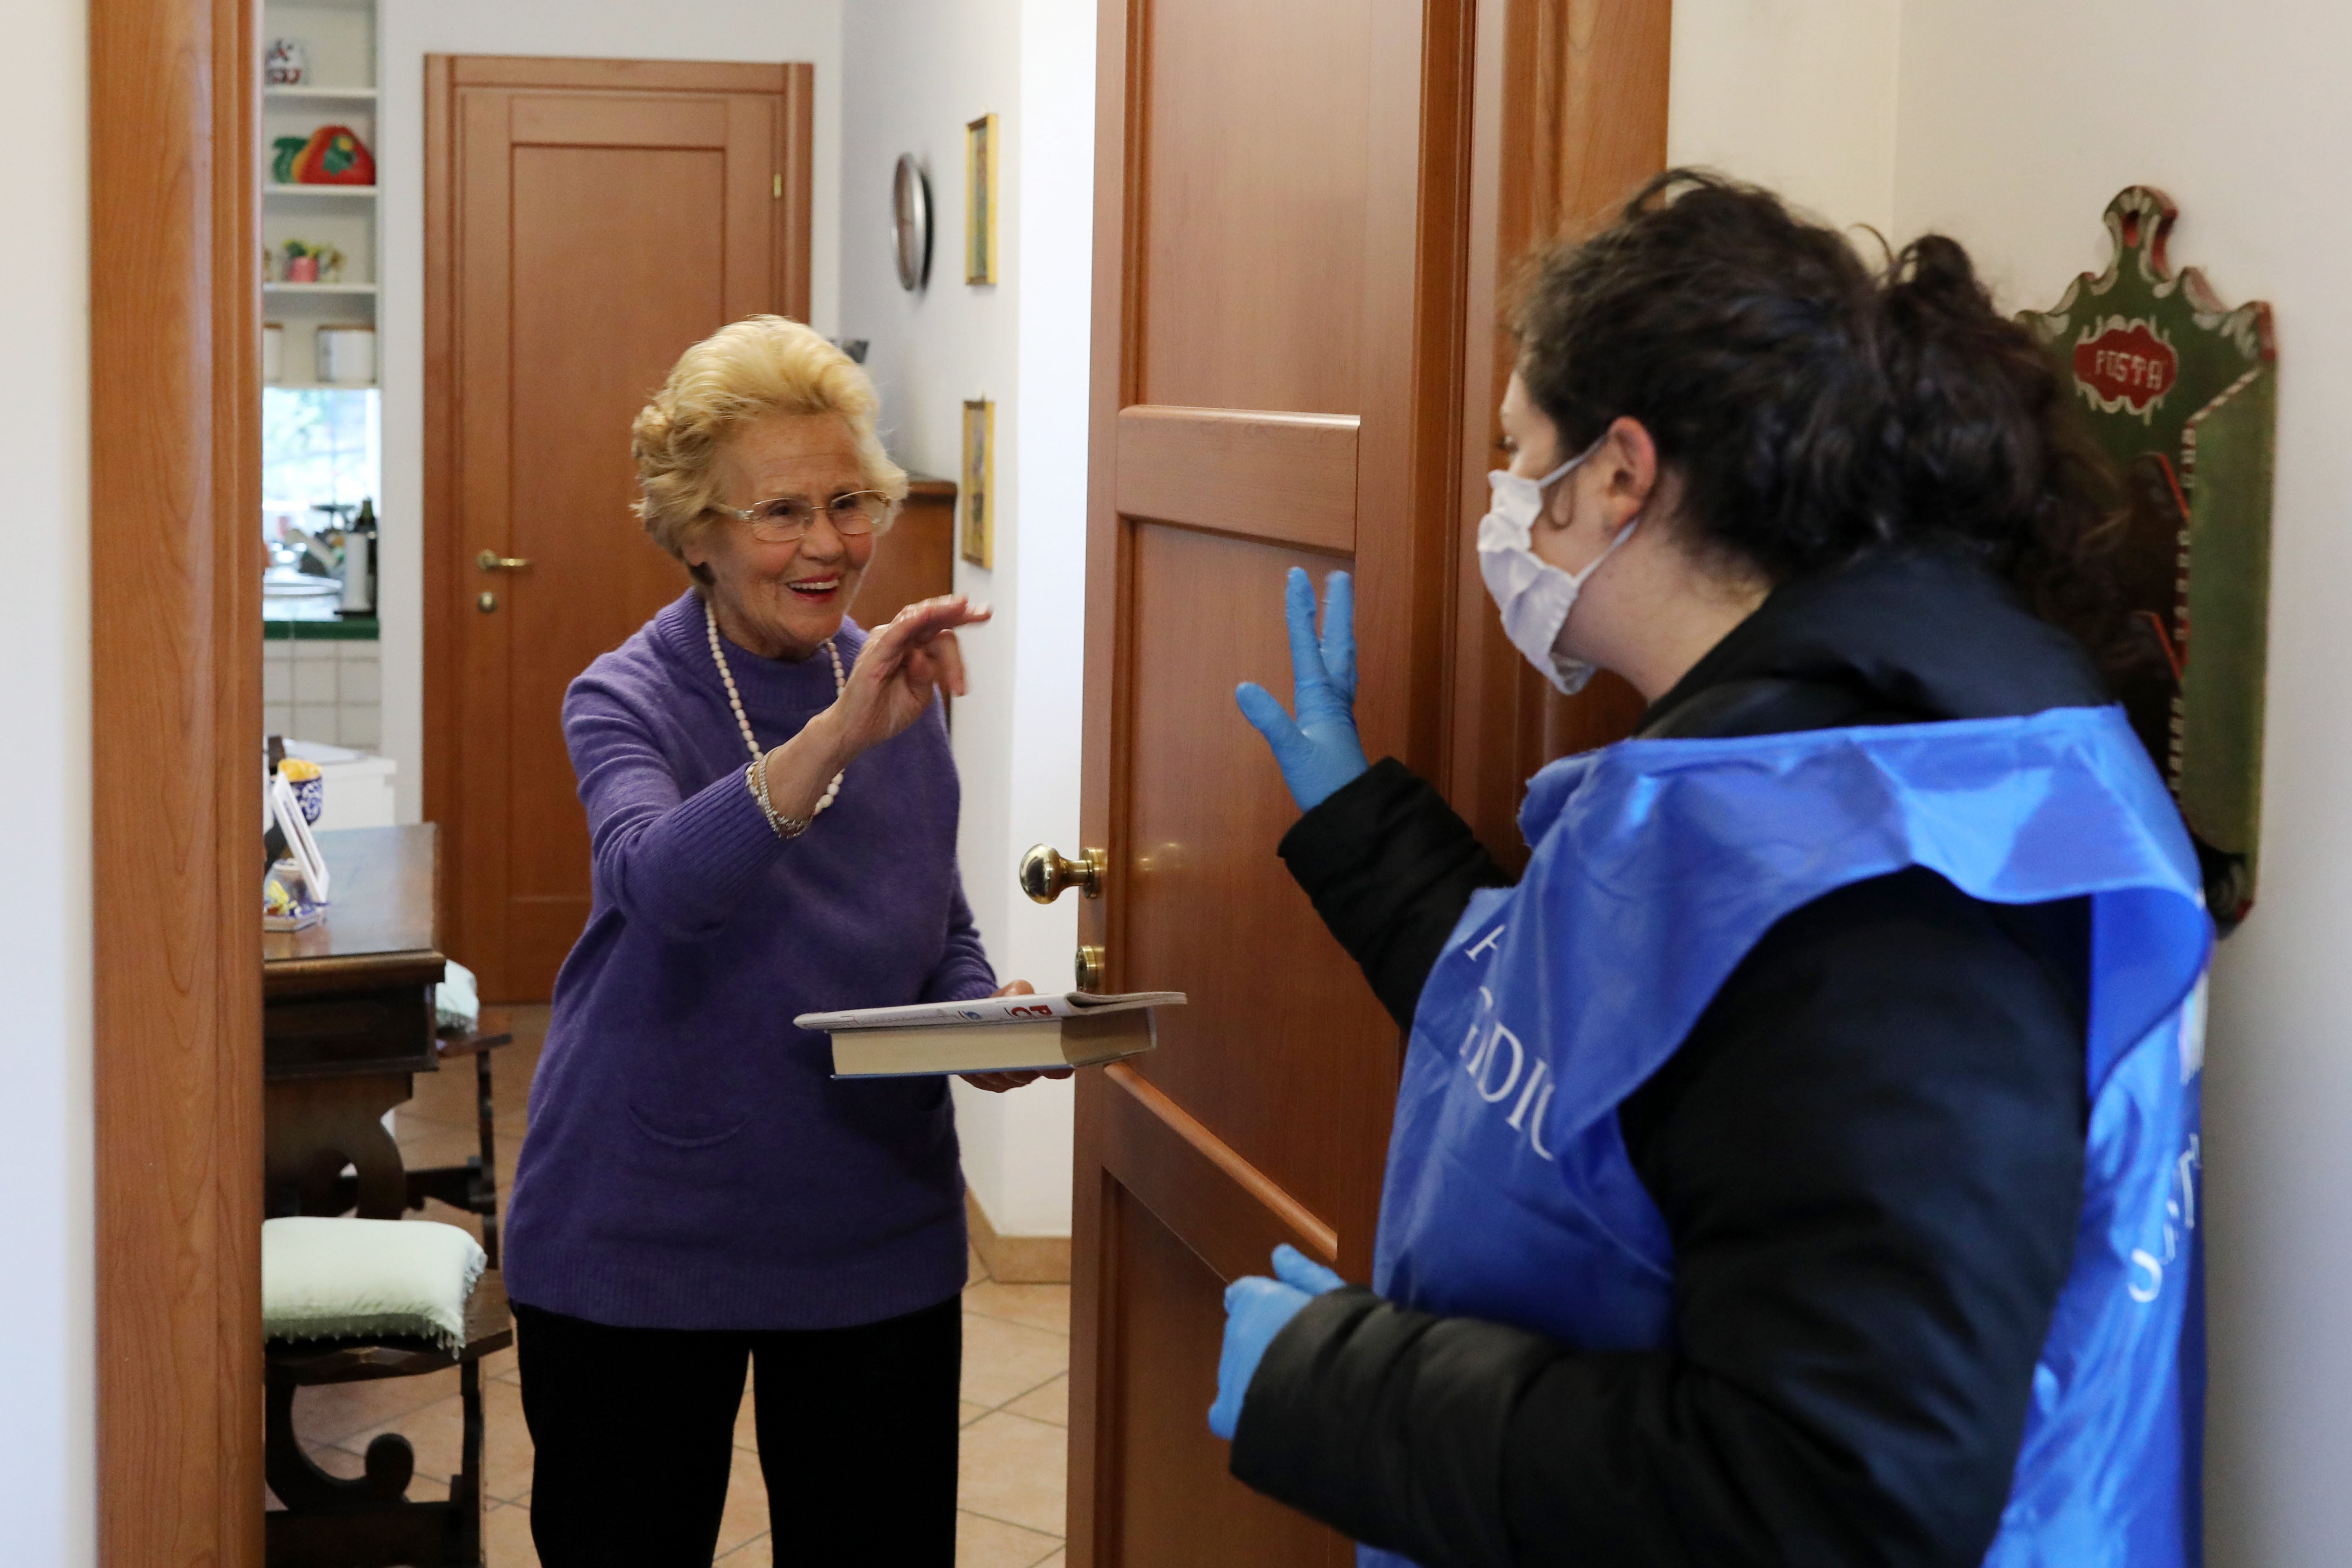 A volunteer speaks to a woman she's providing with home care in Rome during Italy's COVID-19 lockdown.